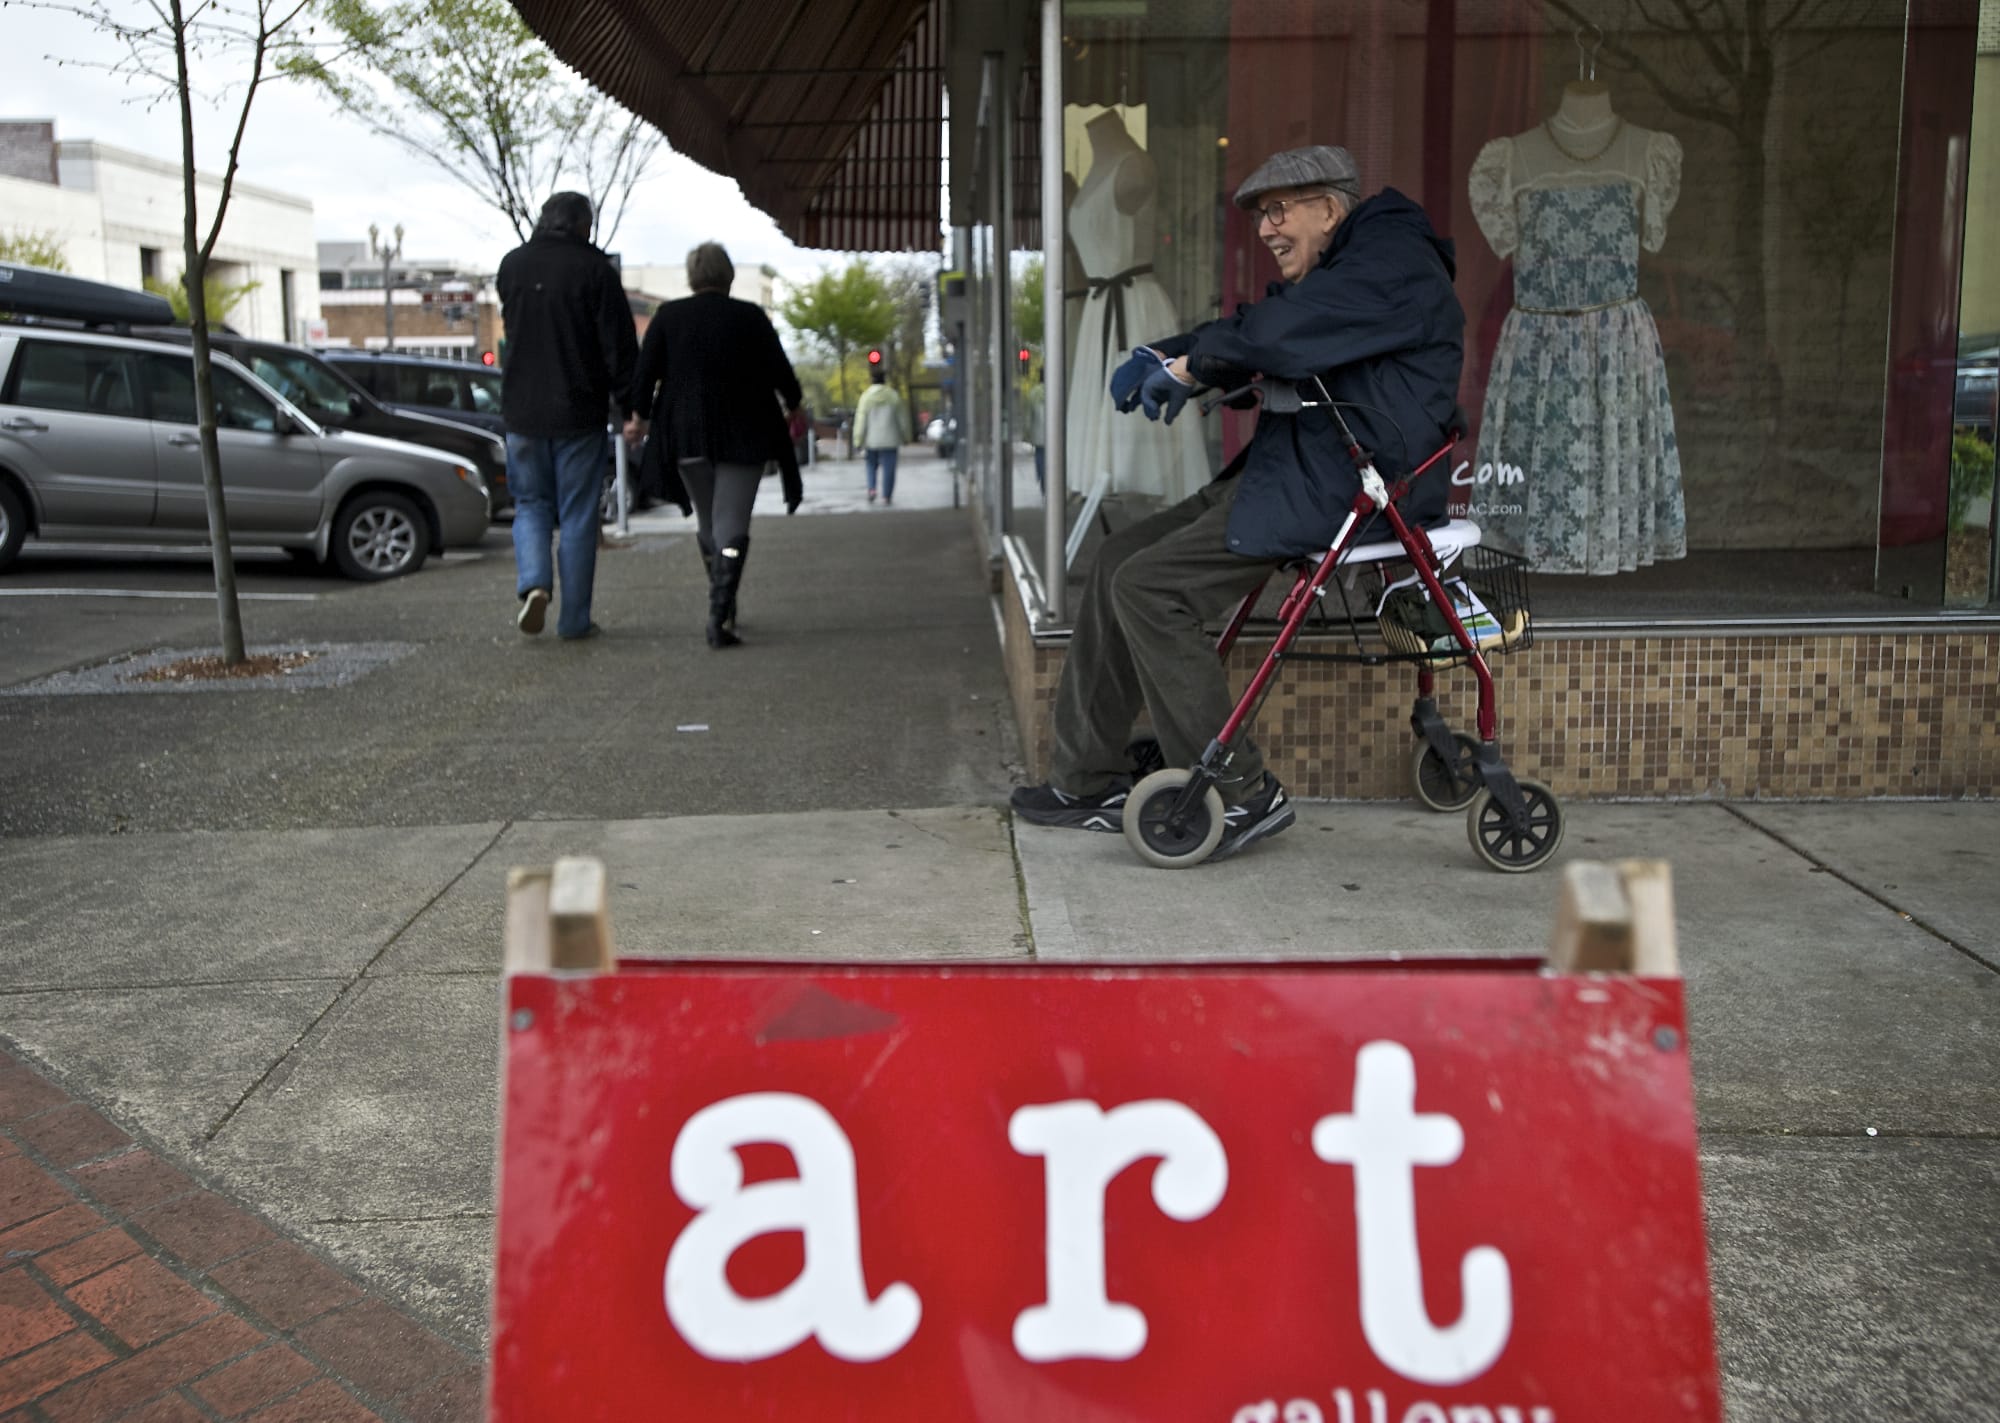 Painter and Southwest Washington Watercolor Society member John Beckman, 86, waits for a ride near a sign directing people to Gallery 360 at Main and Ninth streets during First Friday Downtown art walk.